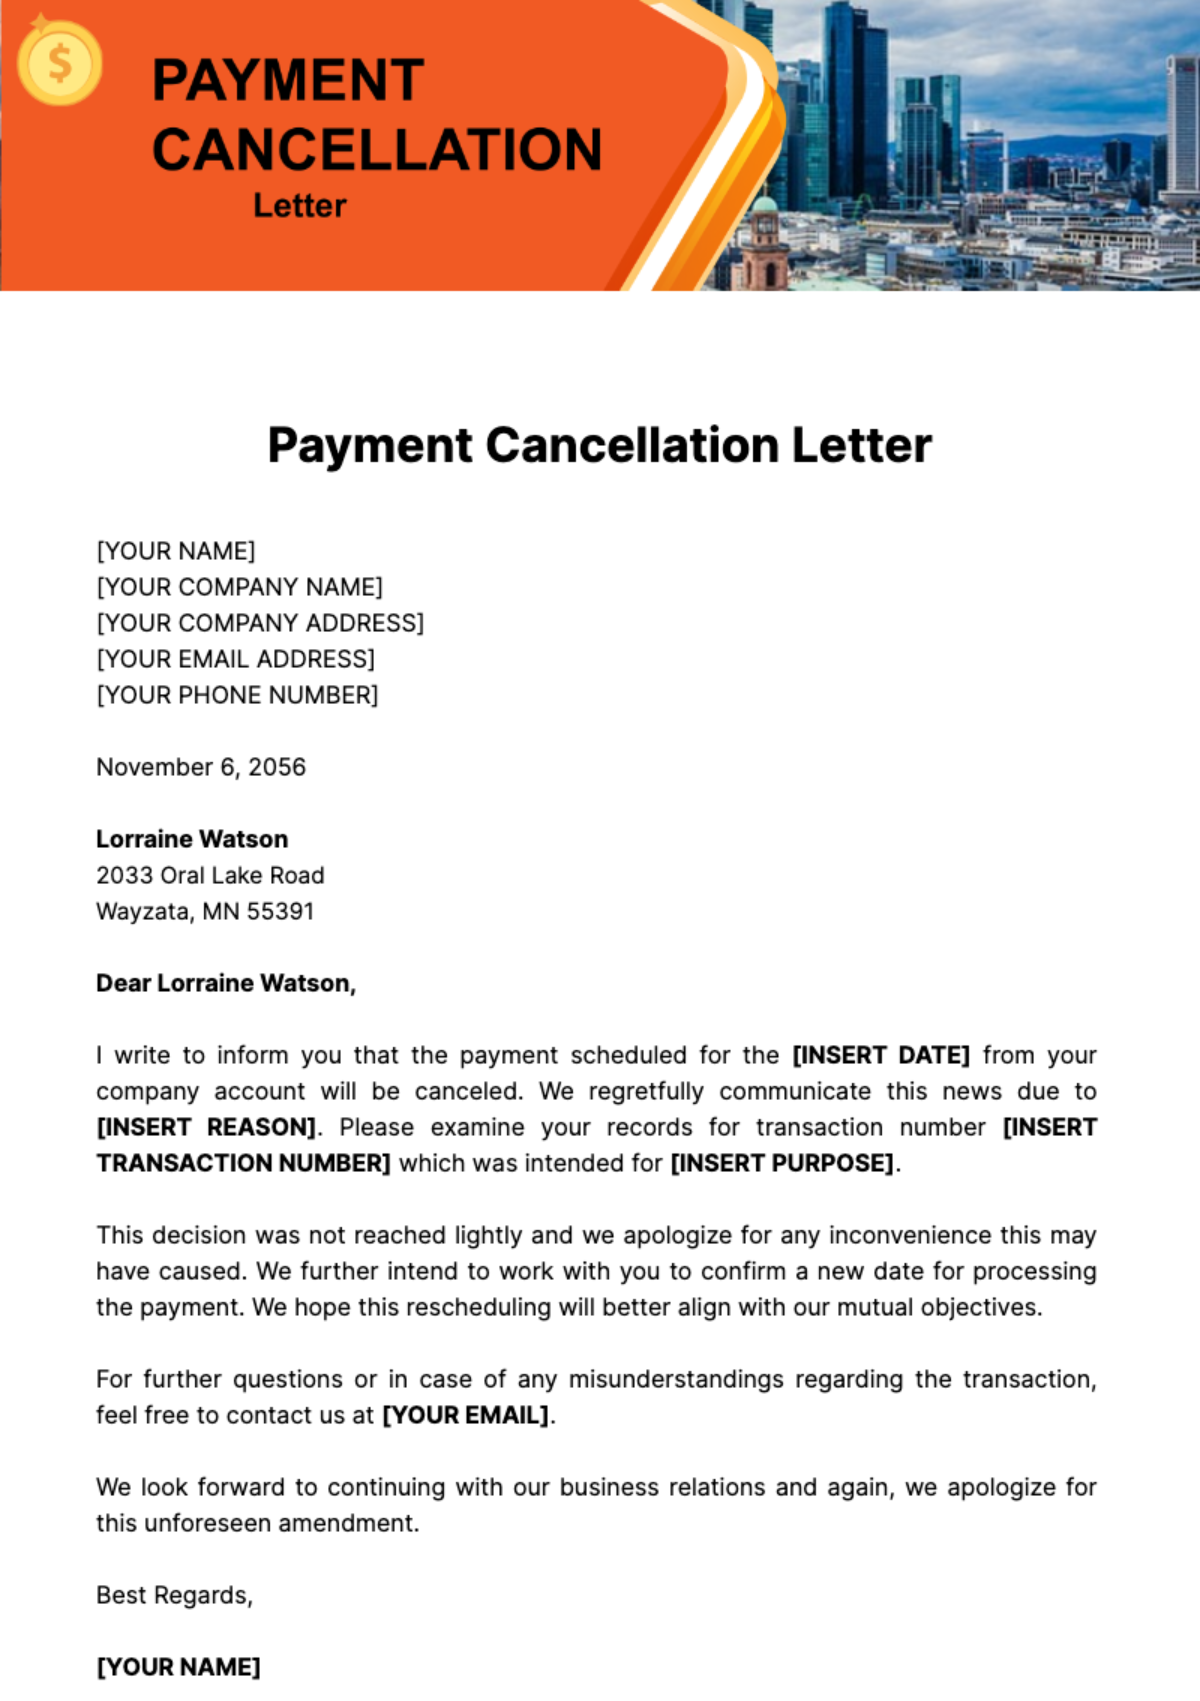 Payment Cancellation Letter Template